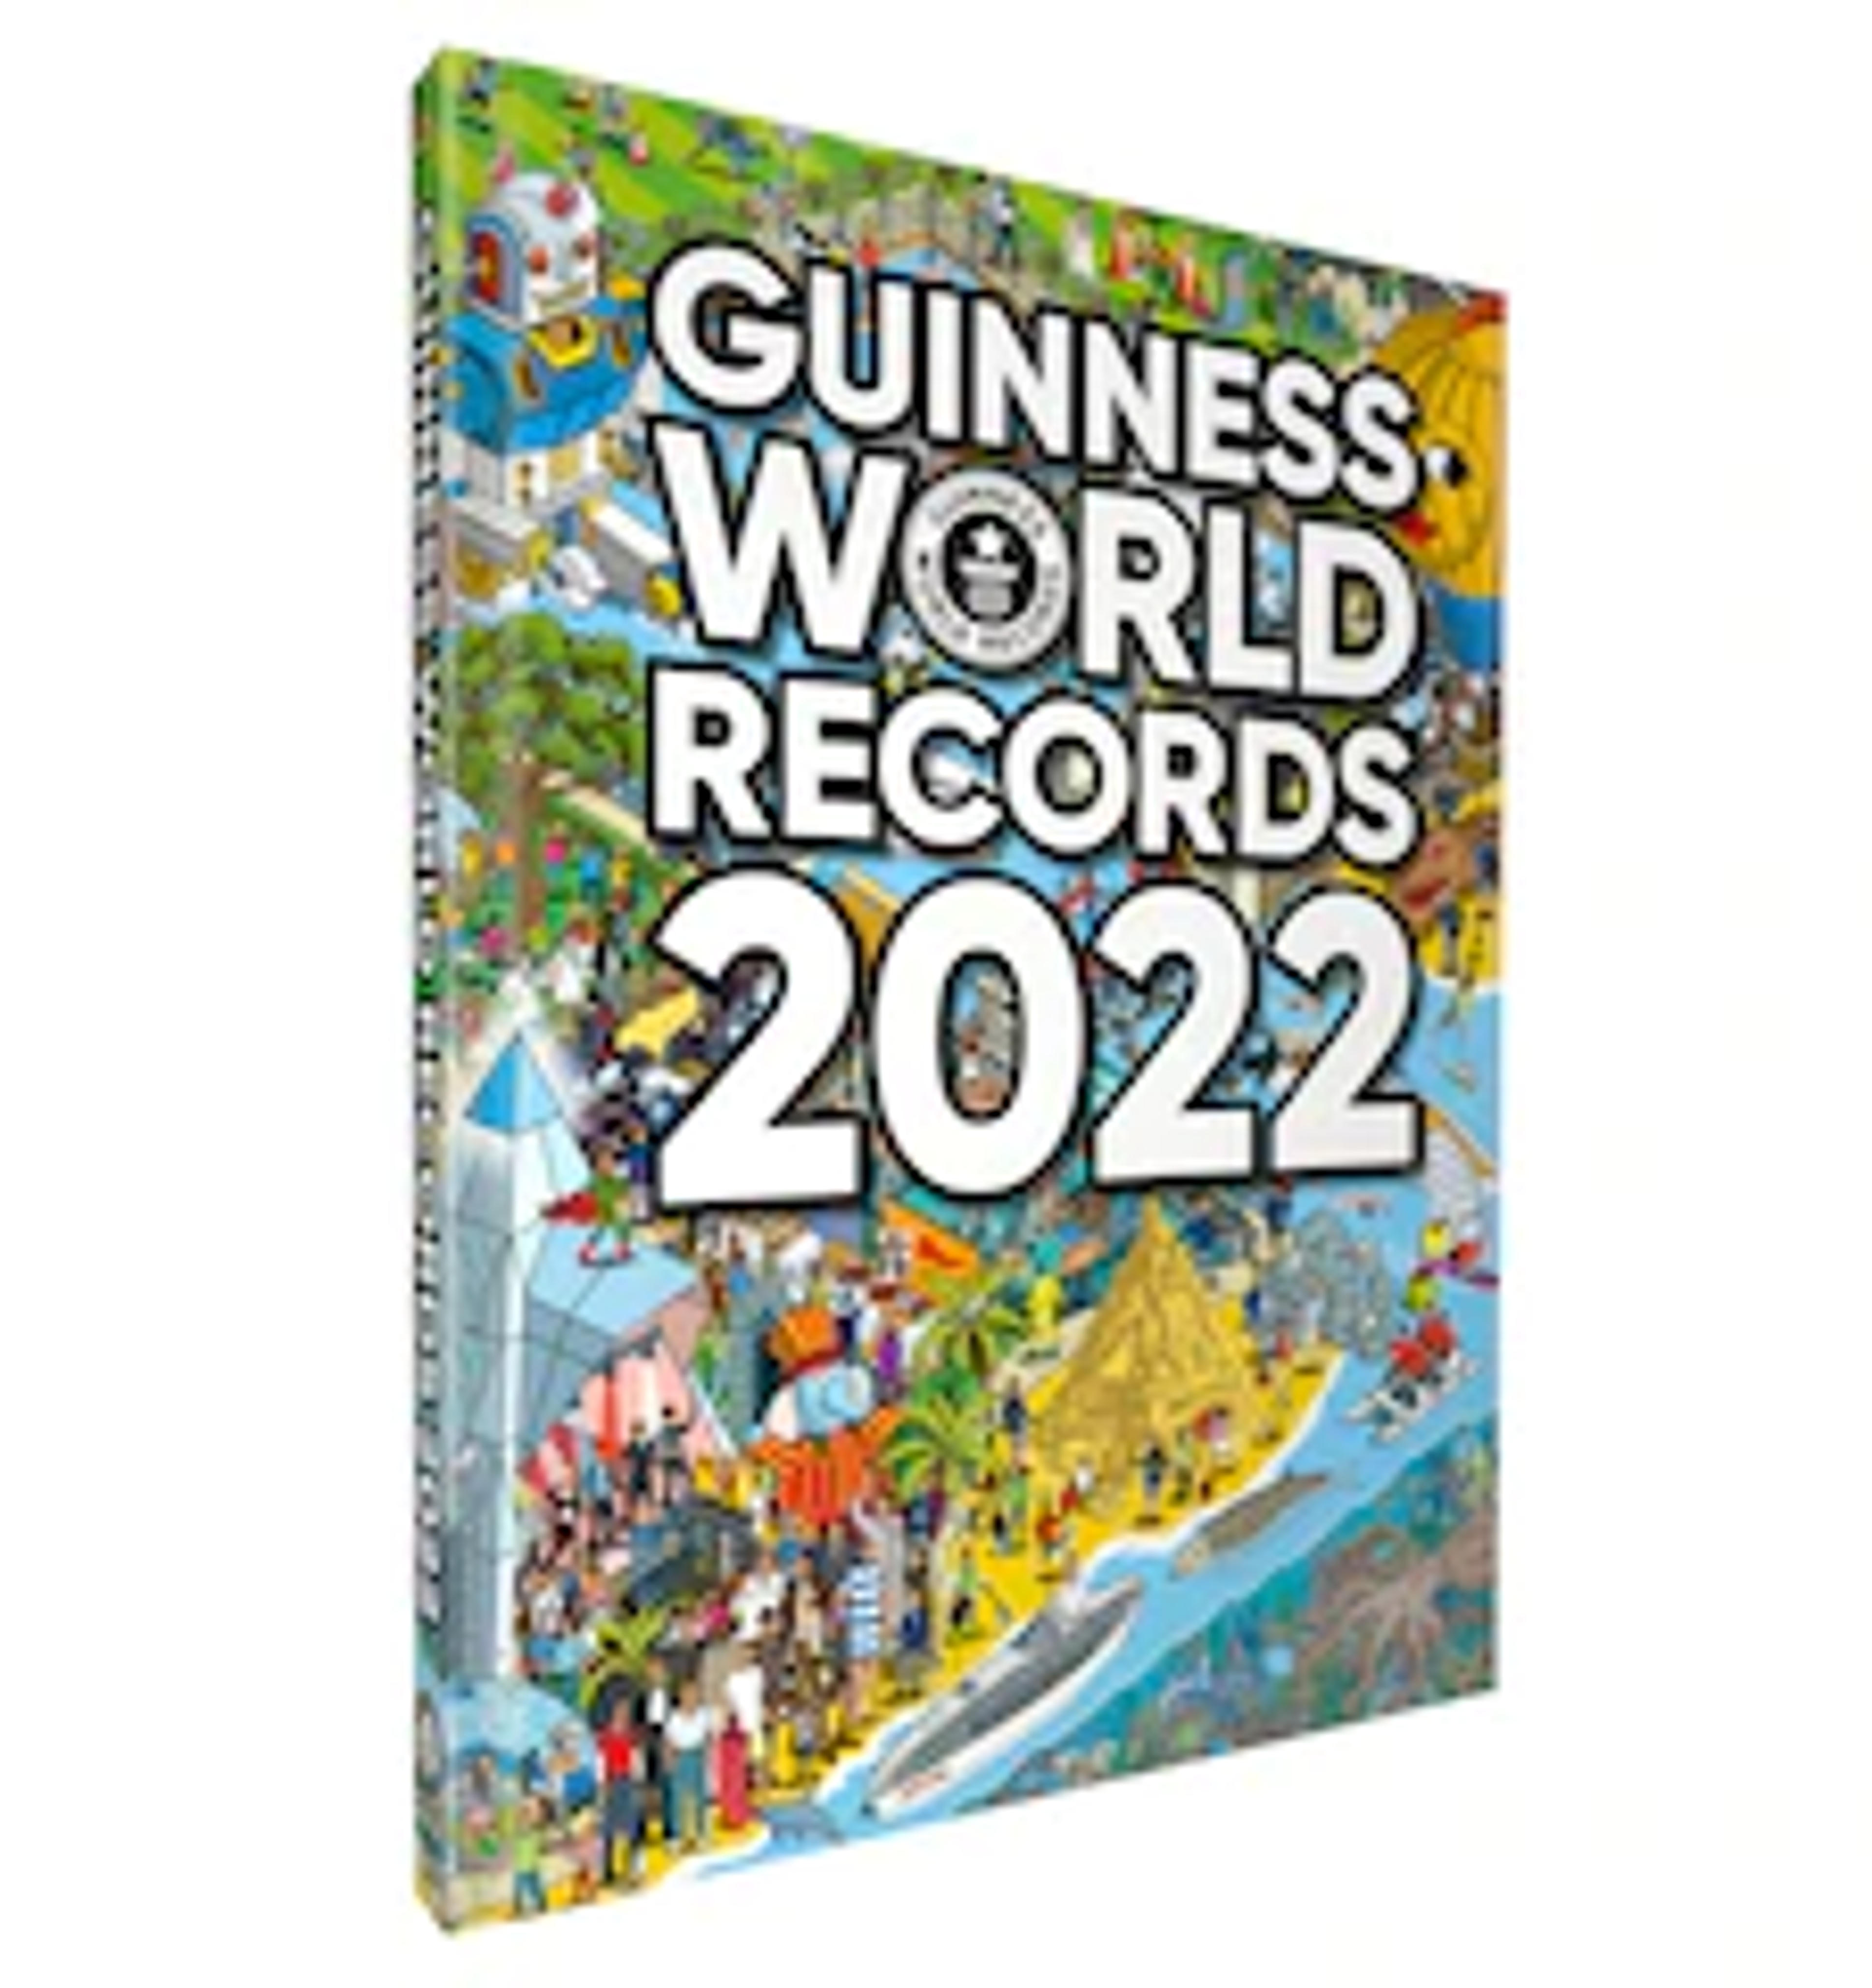 Guinness World Records 2022 (French Edition): Le Mondial des Records Guinness 2022 (Édition…